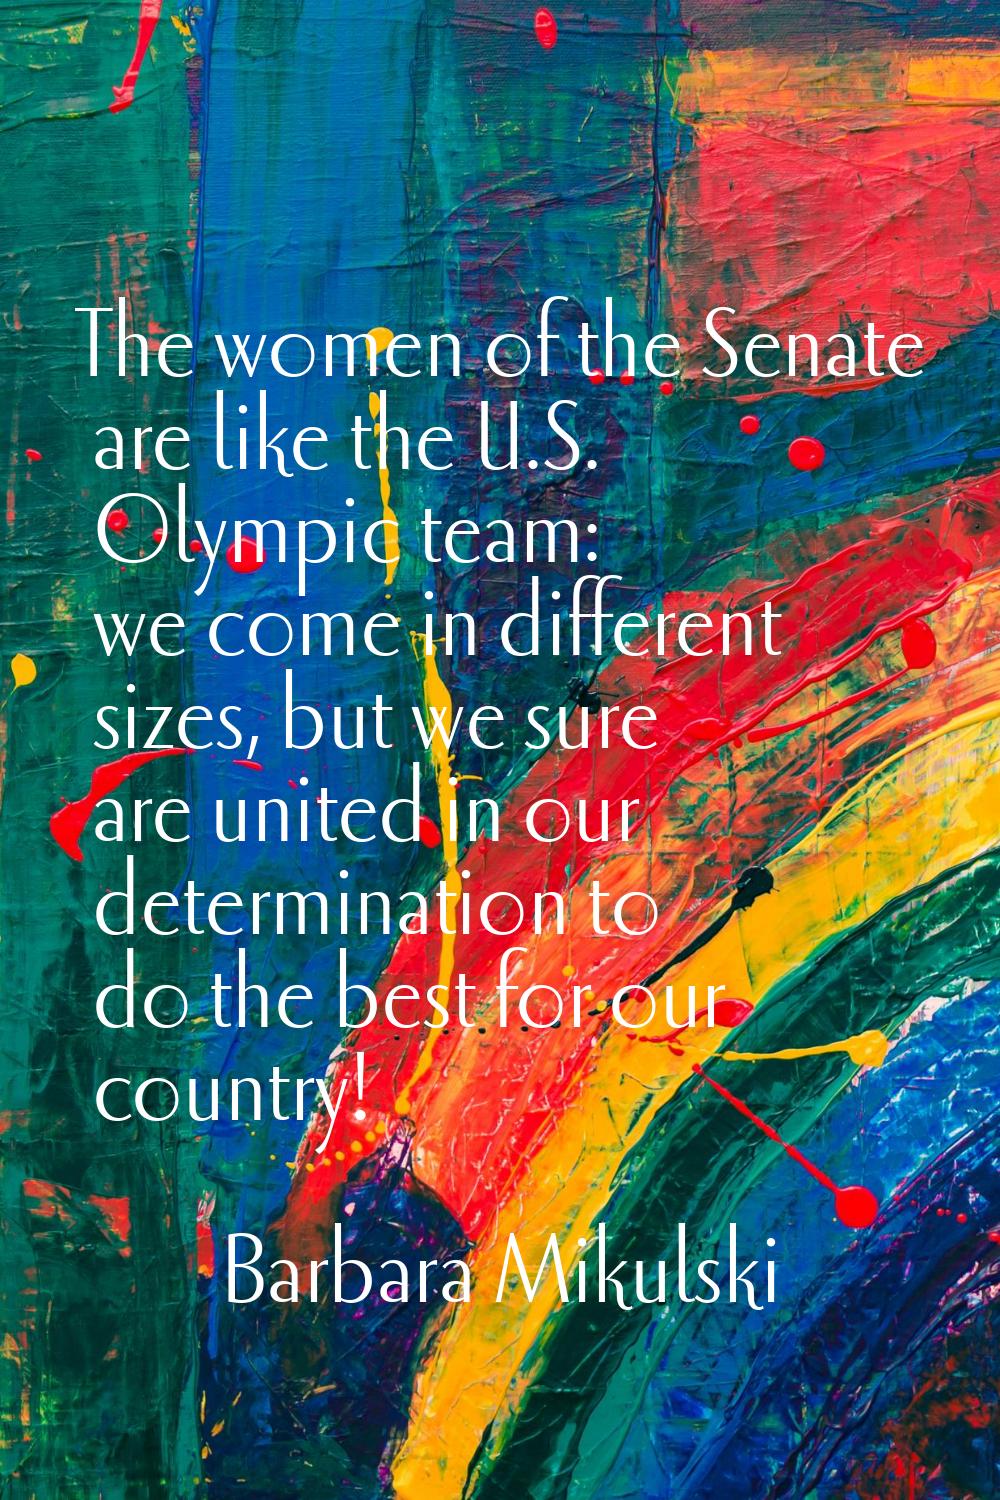 The women of the Senate are like the U.S. Olympic team: we come in different sizes, but we sure are